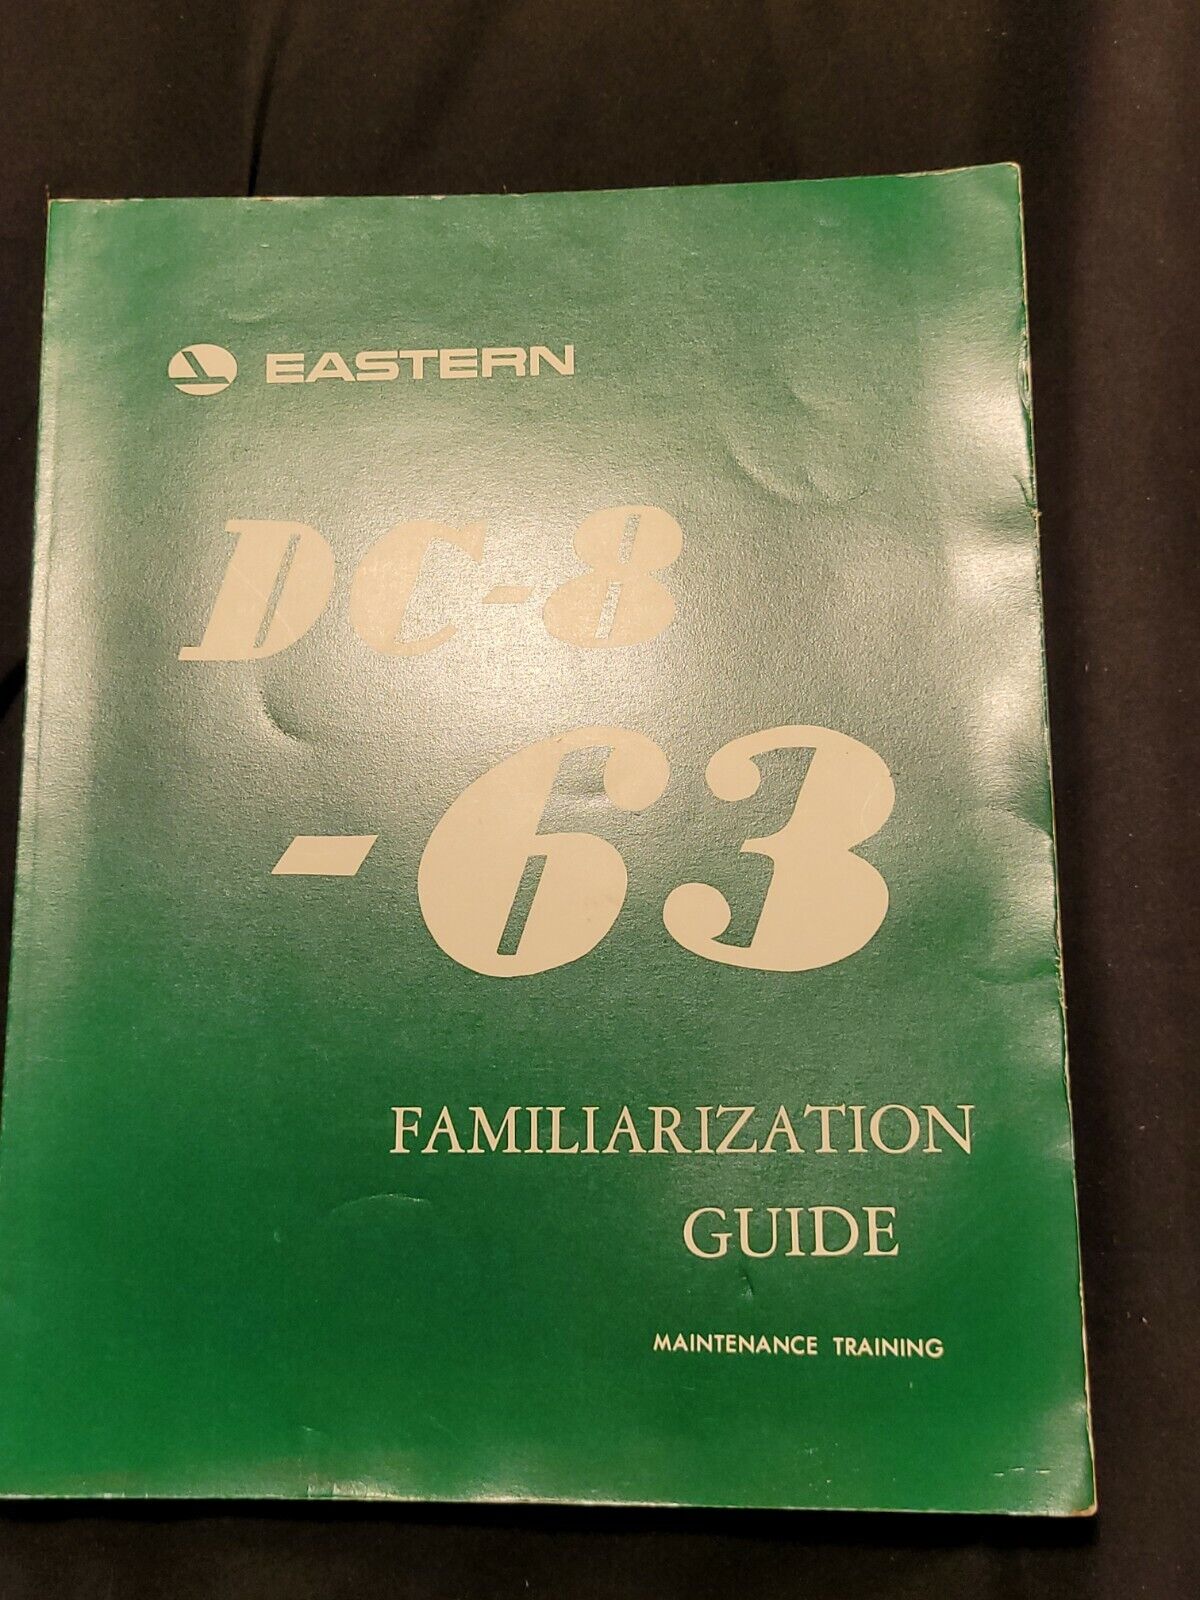 DC8-63 DC8-61 familiarization guide avionic maintenance Eastern Airlines